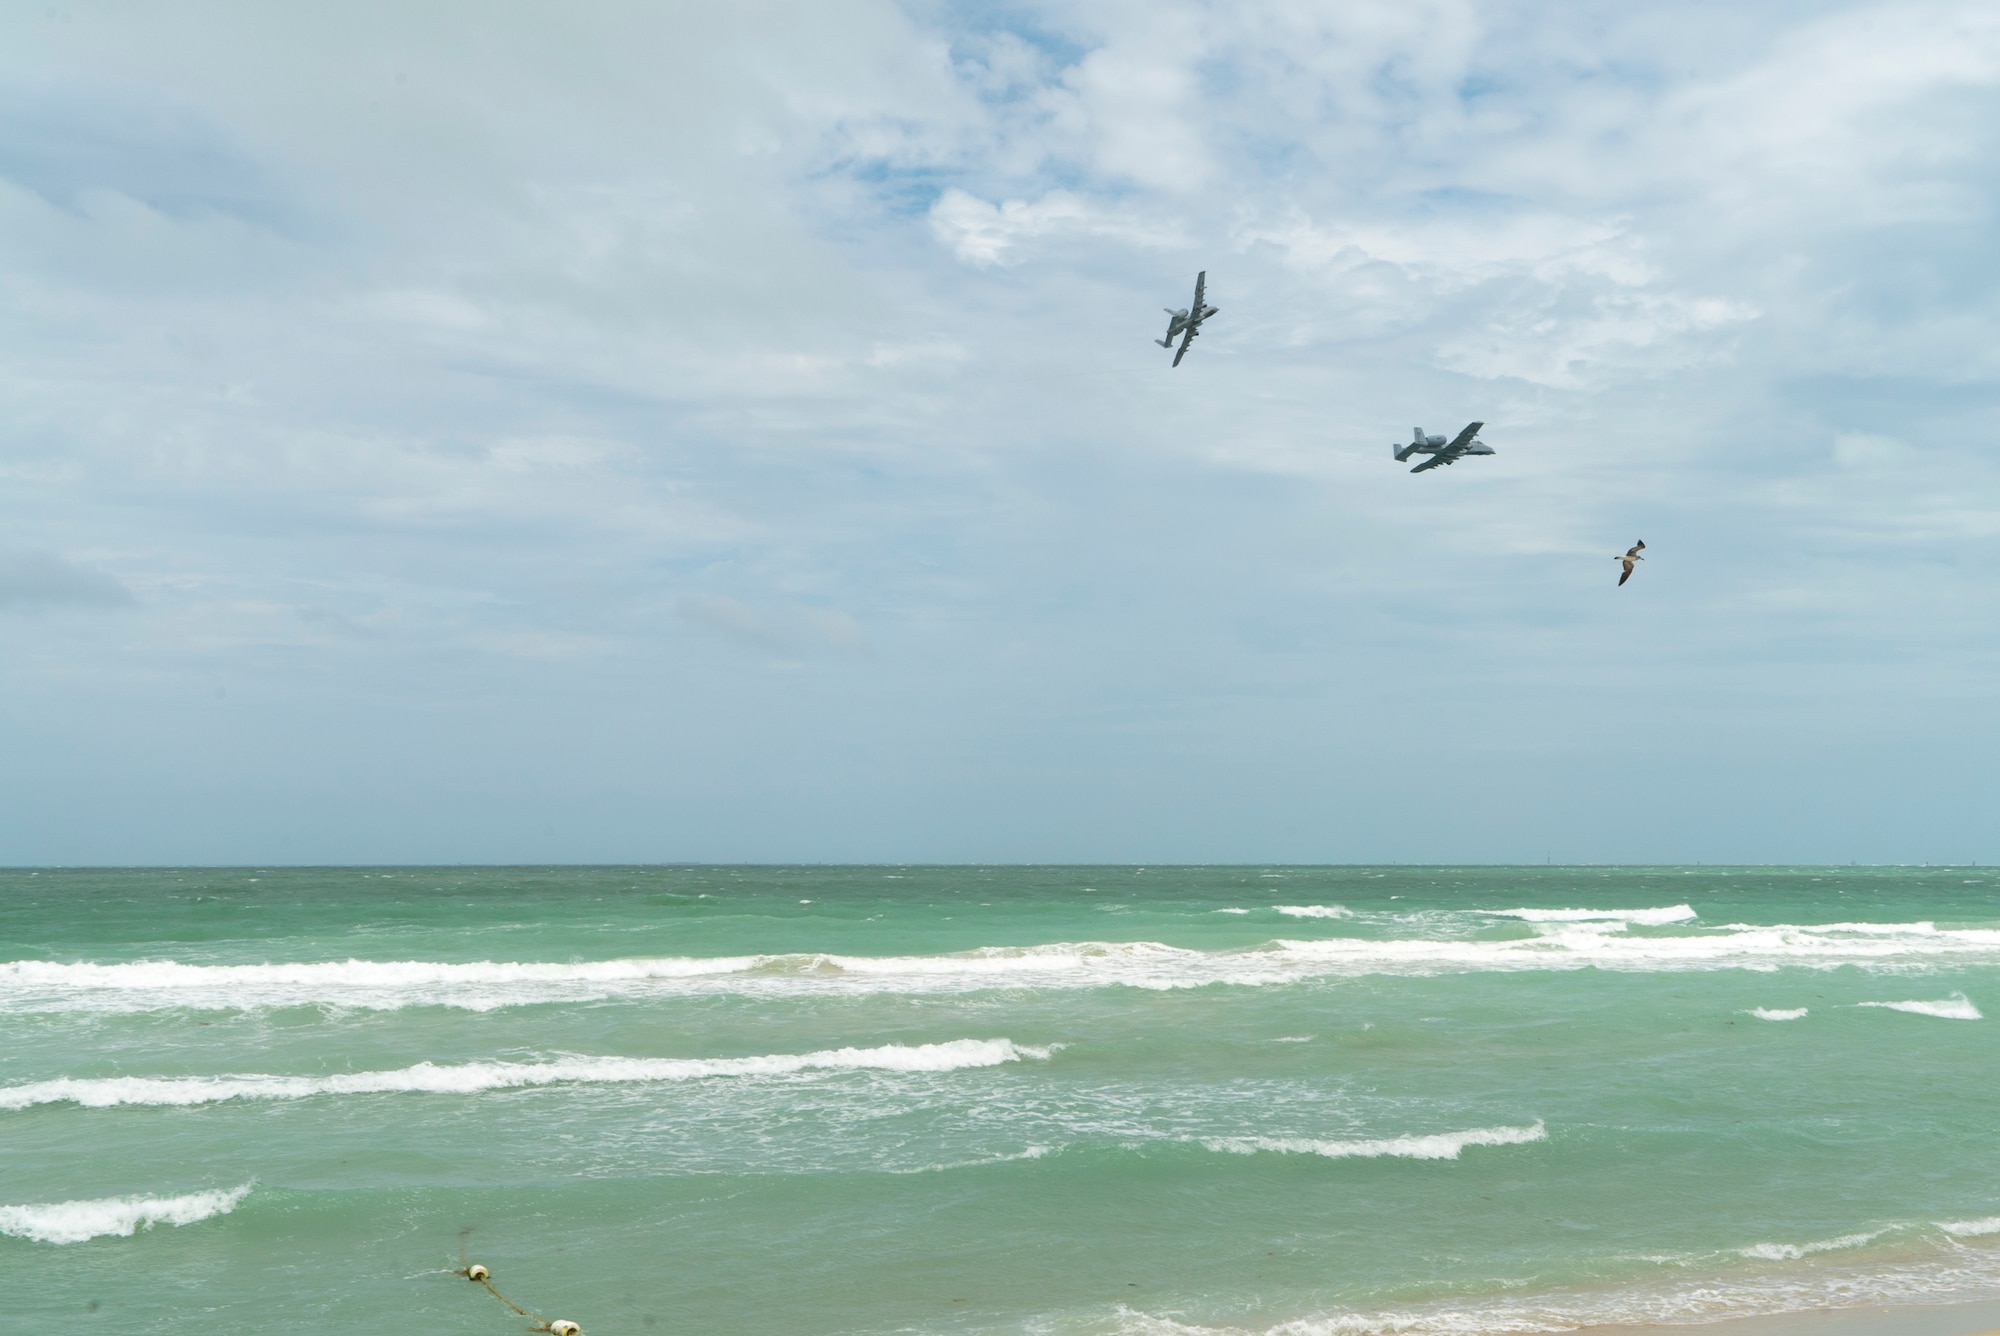 Two A-10 Thunderbolt IIs from the 442nd Fighter Wing fly in formation as part of a combat search and rescue demonstration with the 920th Rescue Wing over Miami Beach, Florida on May 26th, 2018 during the 2nd annual Salute to American Heroes Air and Sea Show. This two-day event showcases military fighter jets and other aircraft and equipment from all branches of the United States military in observance of Memorial Day. (U.S. Air Force Reserve video by Staff Sergeant Nicholas A. Priest)